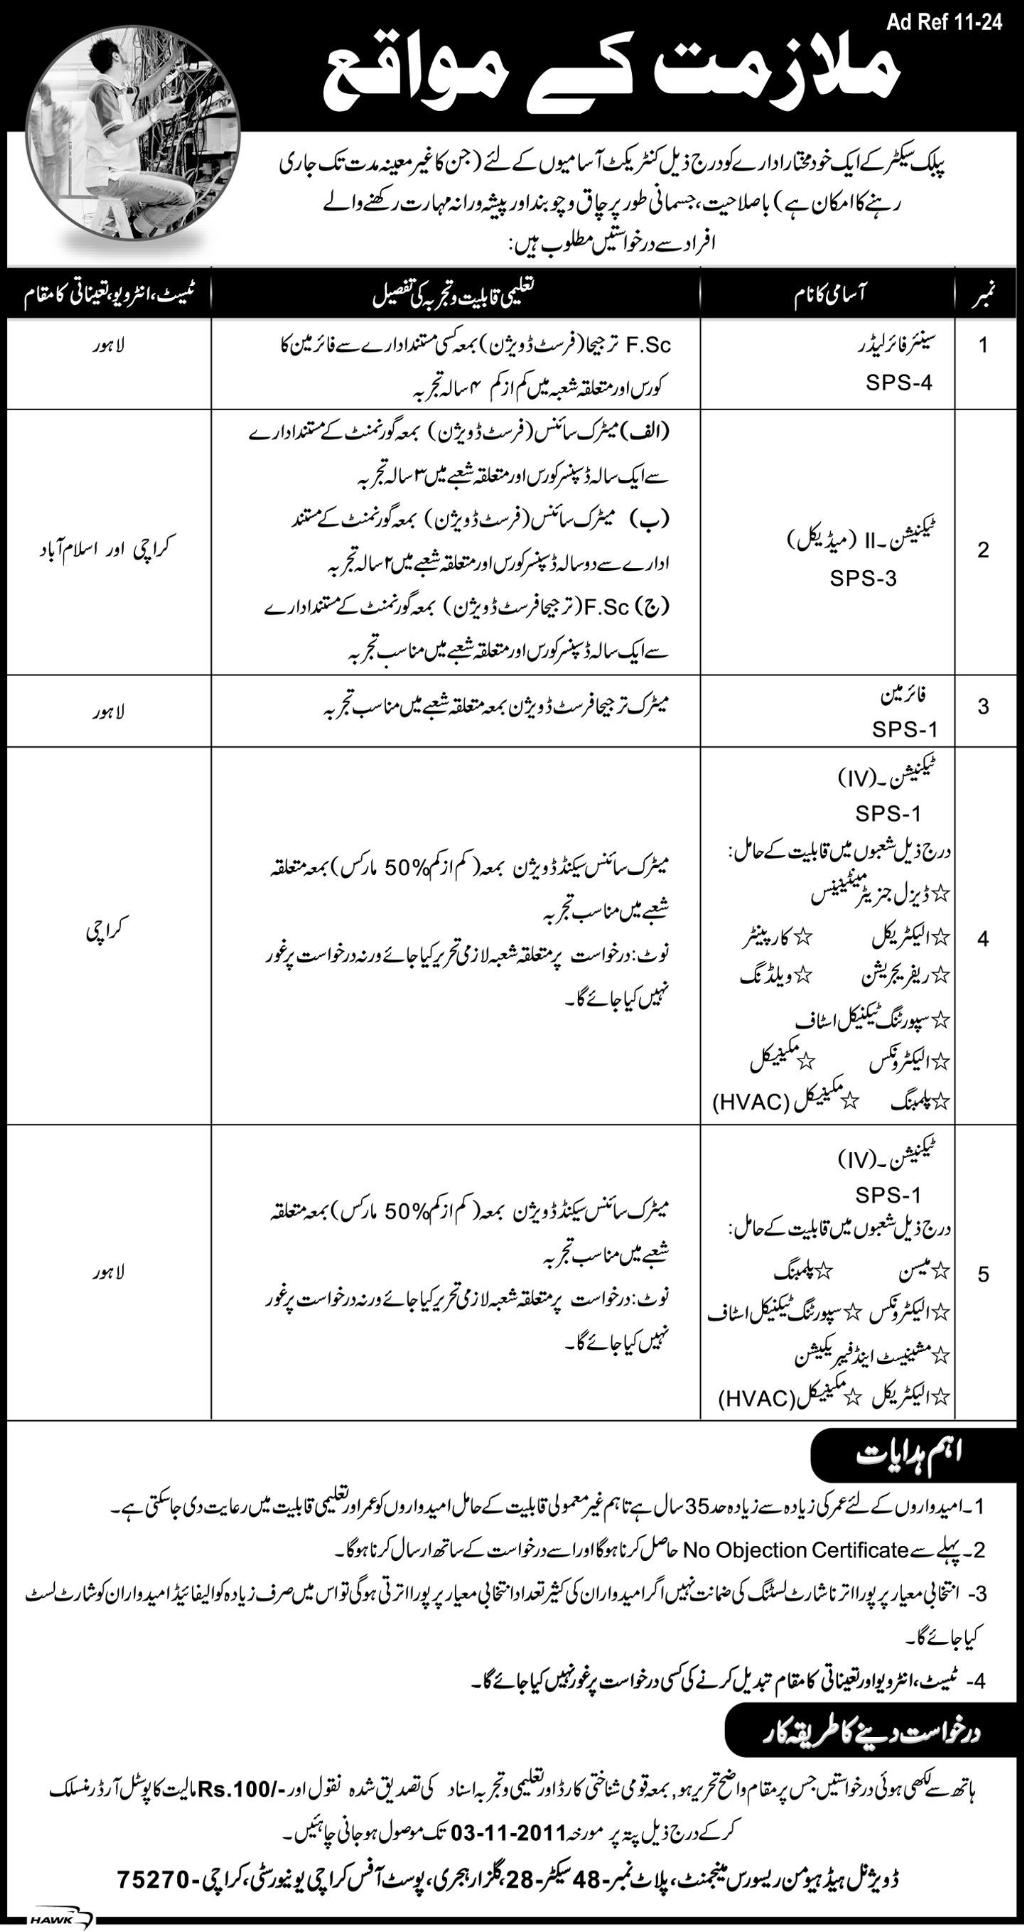 Technicians and Fire Leader Required by a Public Sector Organization